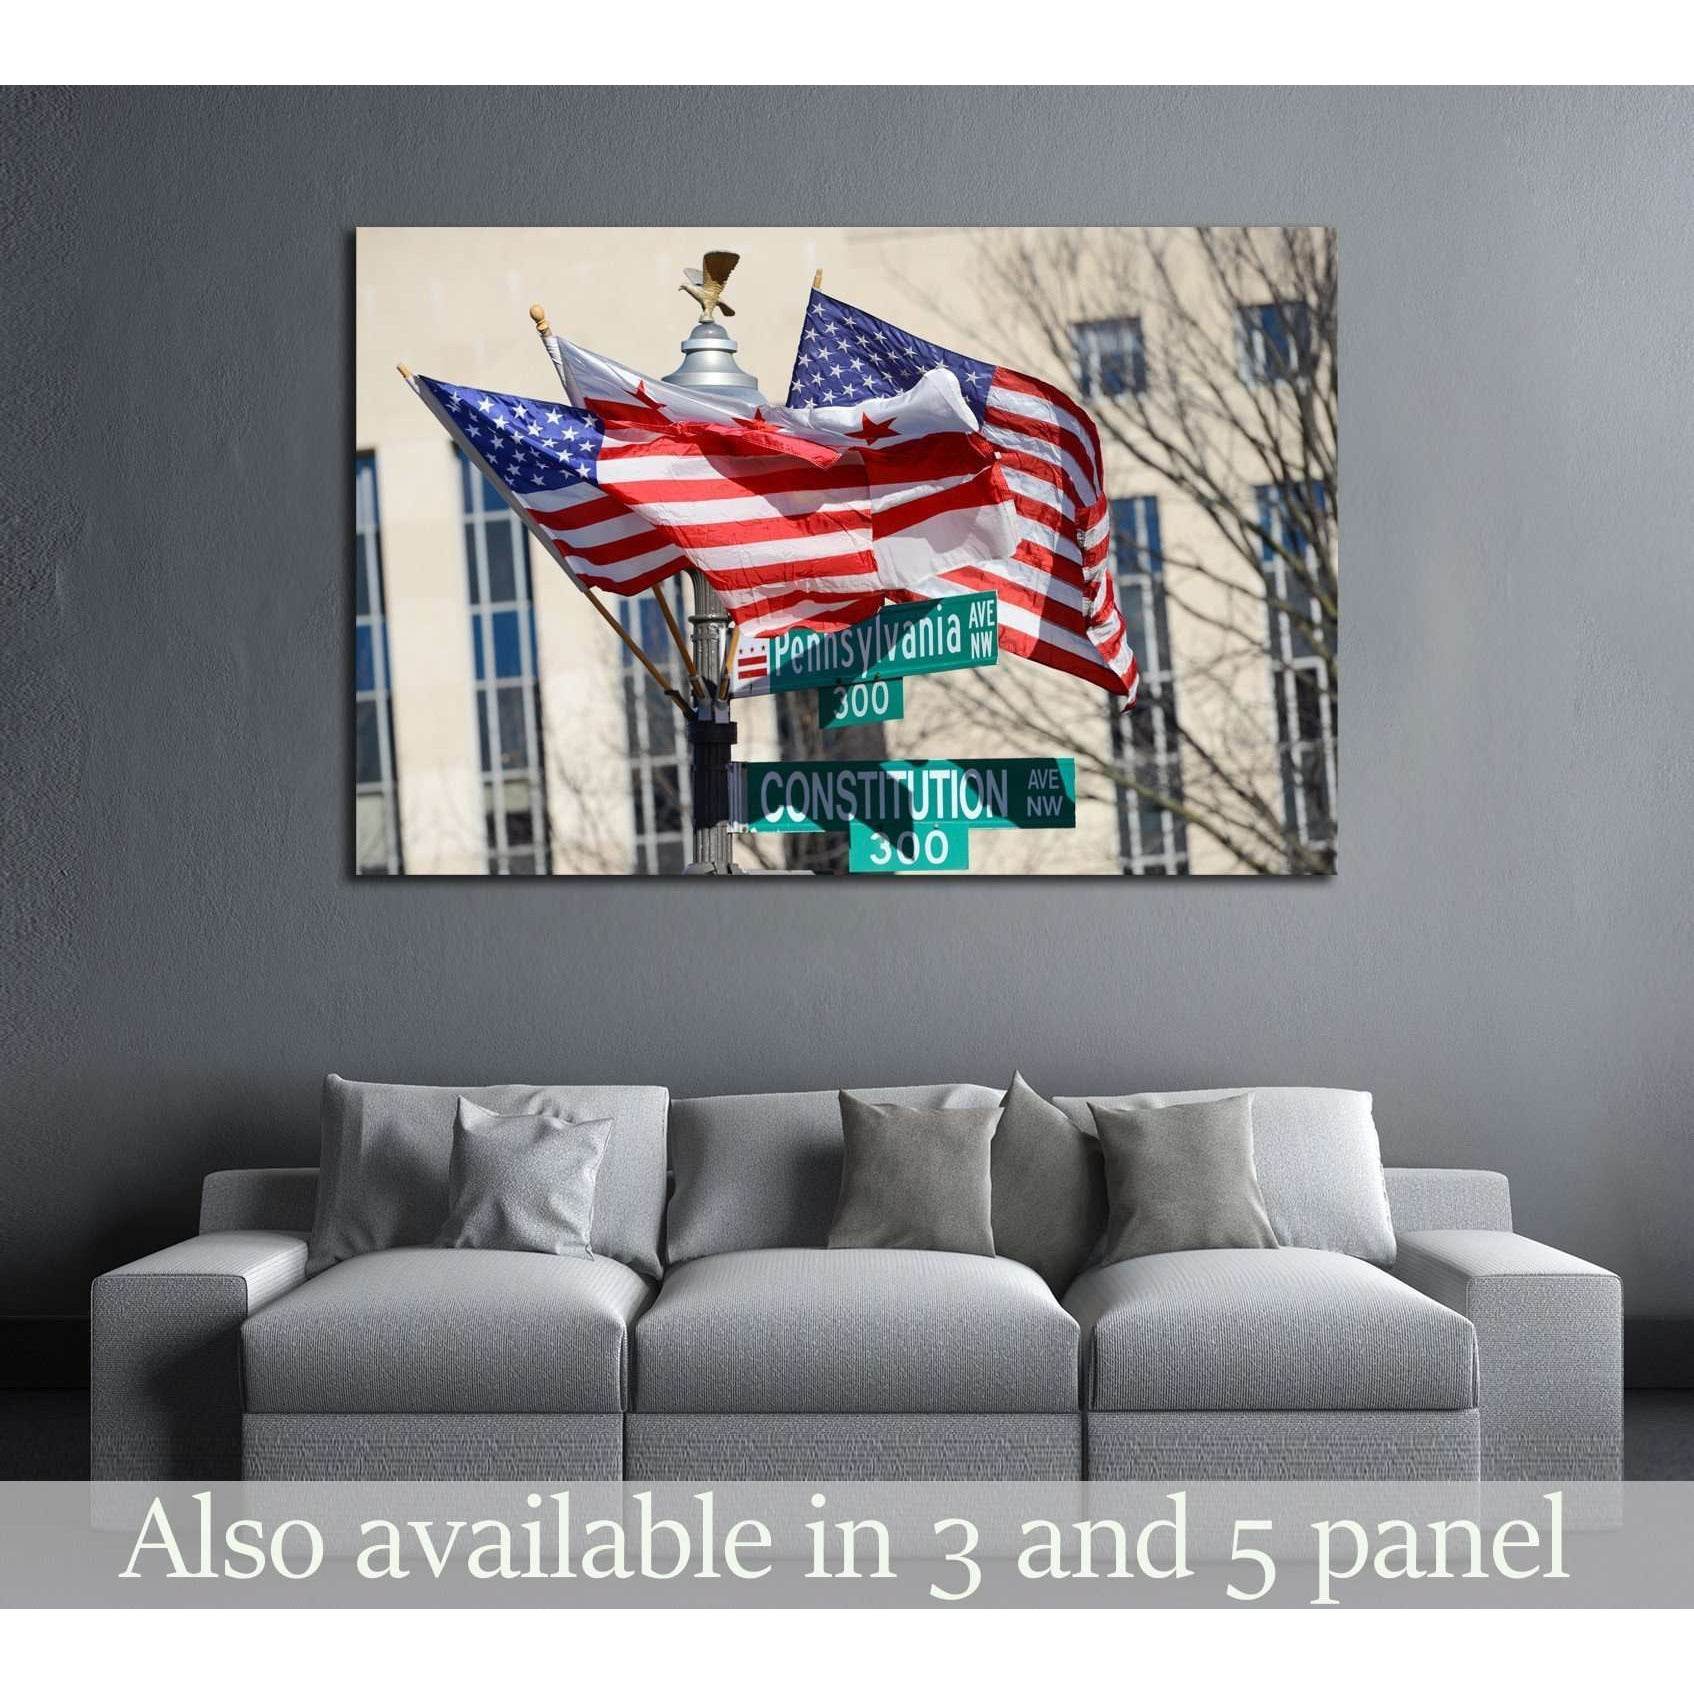 Washington DC, Pennsylvania Avenue and Constitution Avenue junction street signs with DC and United States of America flags on the same post №2271 Ready to Hang Canvas Print